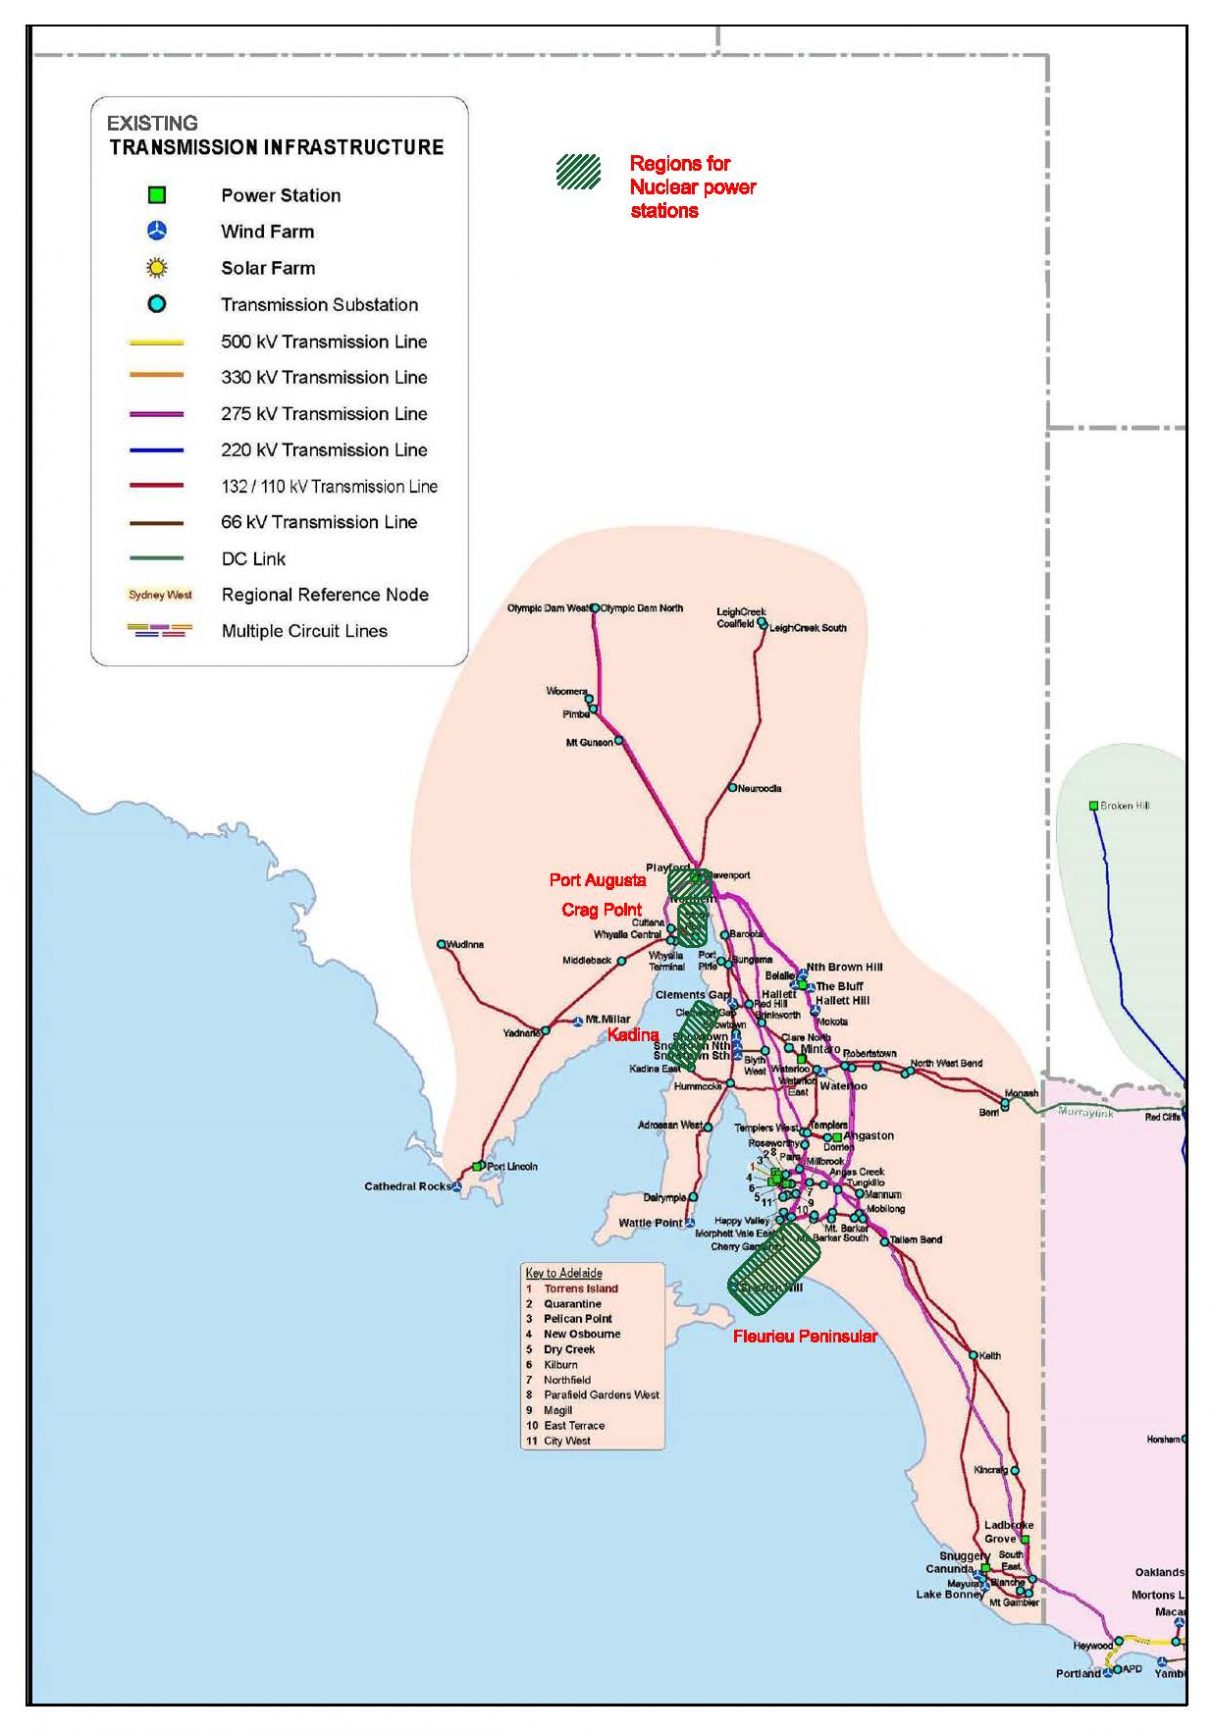 South Australian regions of interest for nuclear power stations